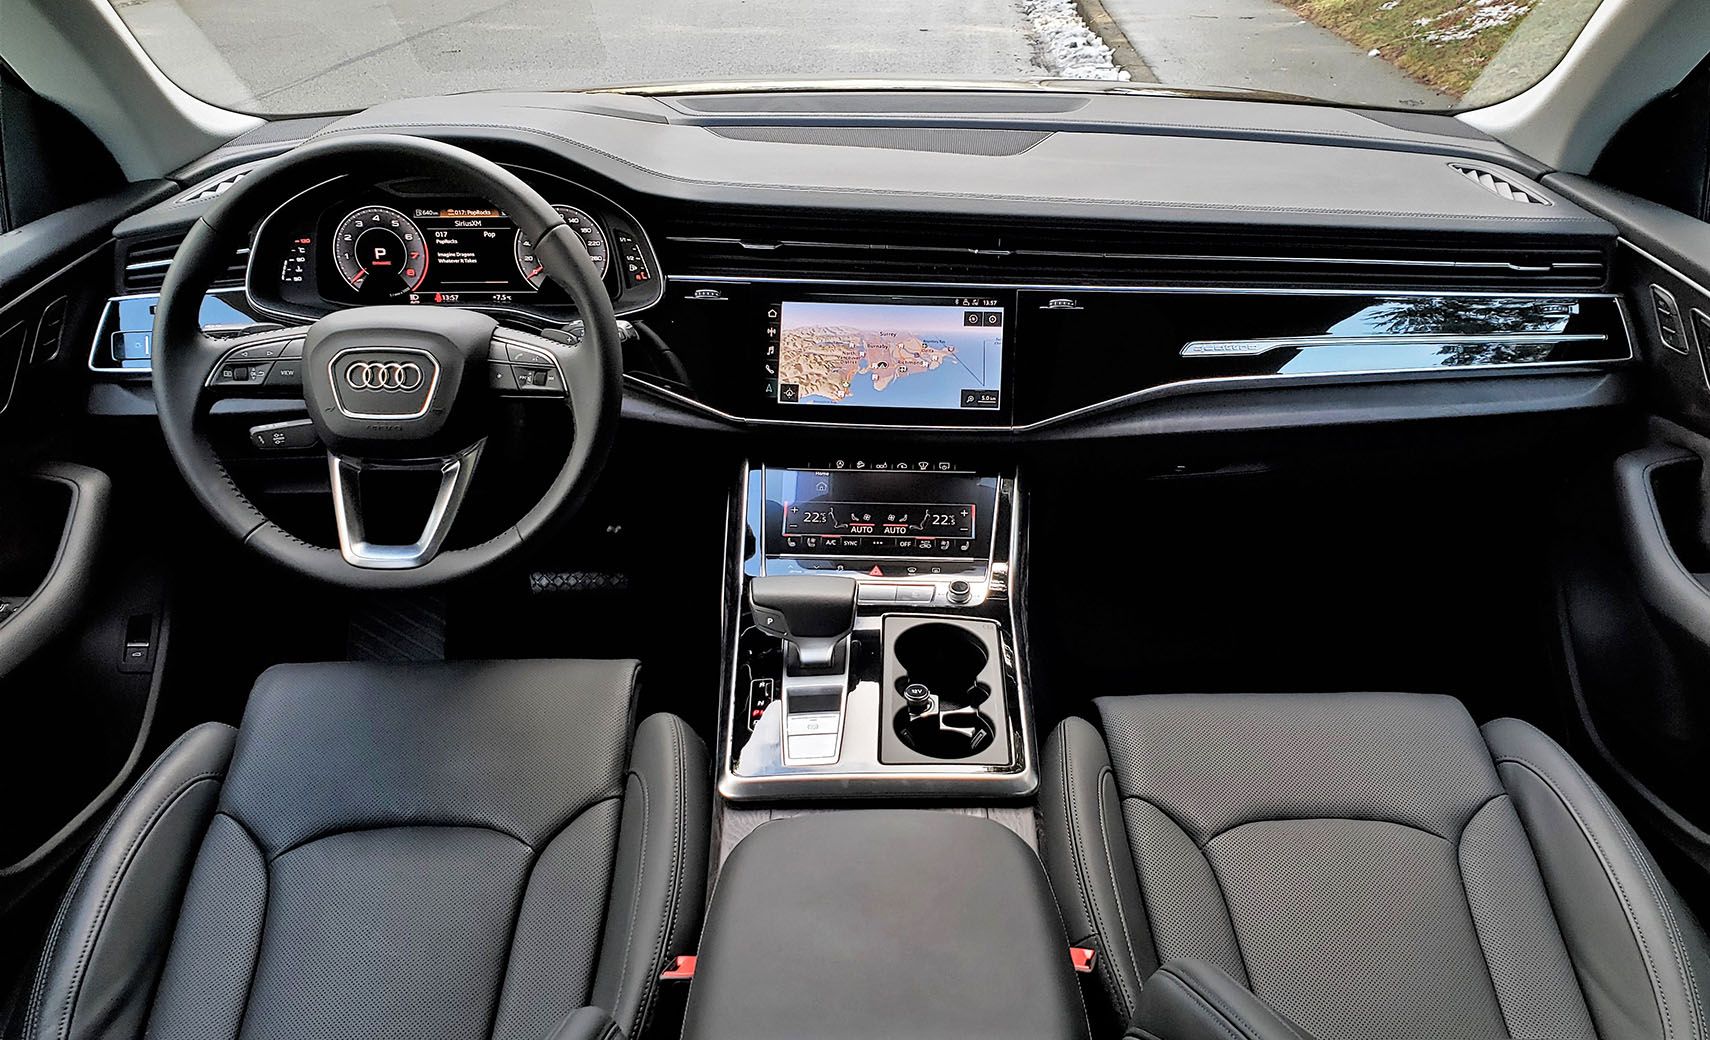 You'll be hard pressed to find anything about the Q8 interior to criticize.